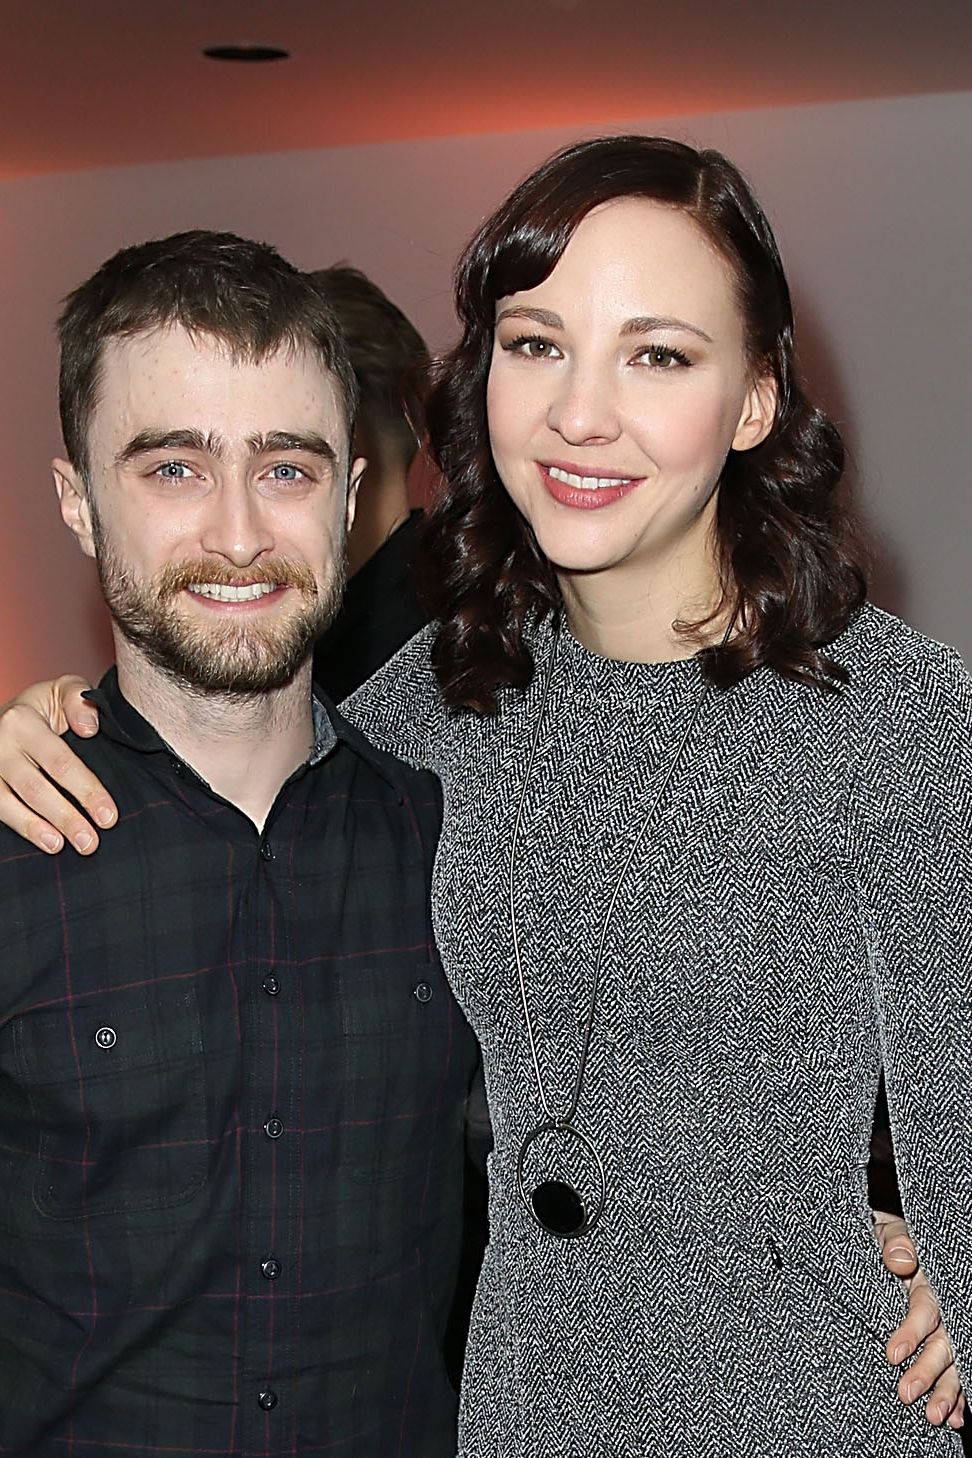 Daniel Radcliffe and Erin Darke attend the  "Swiss Army Man" Premiere Party at The Acura Studio at Sundance Film Festival 2016 on January 22, 2016 in Park City, Utah